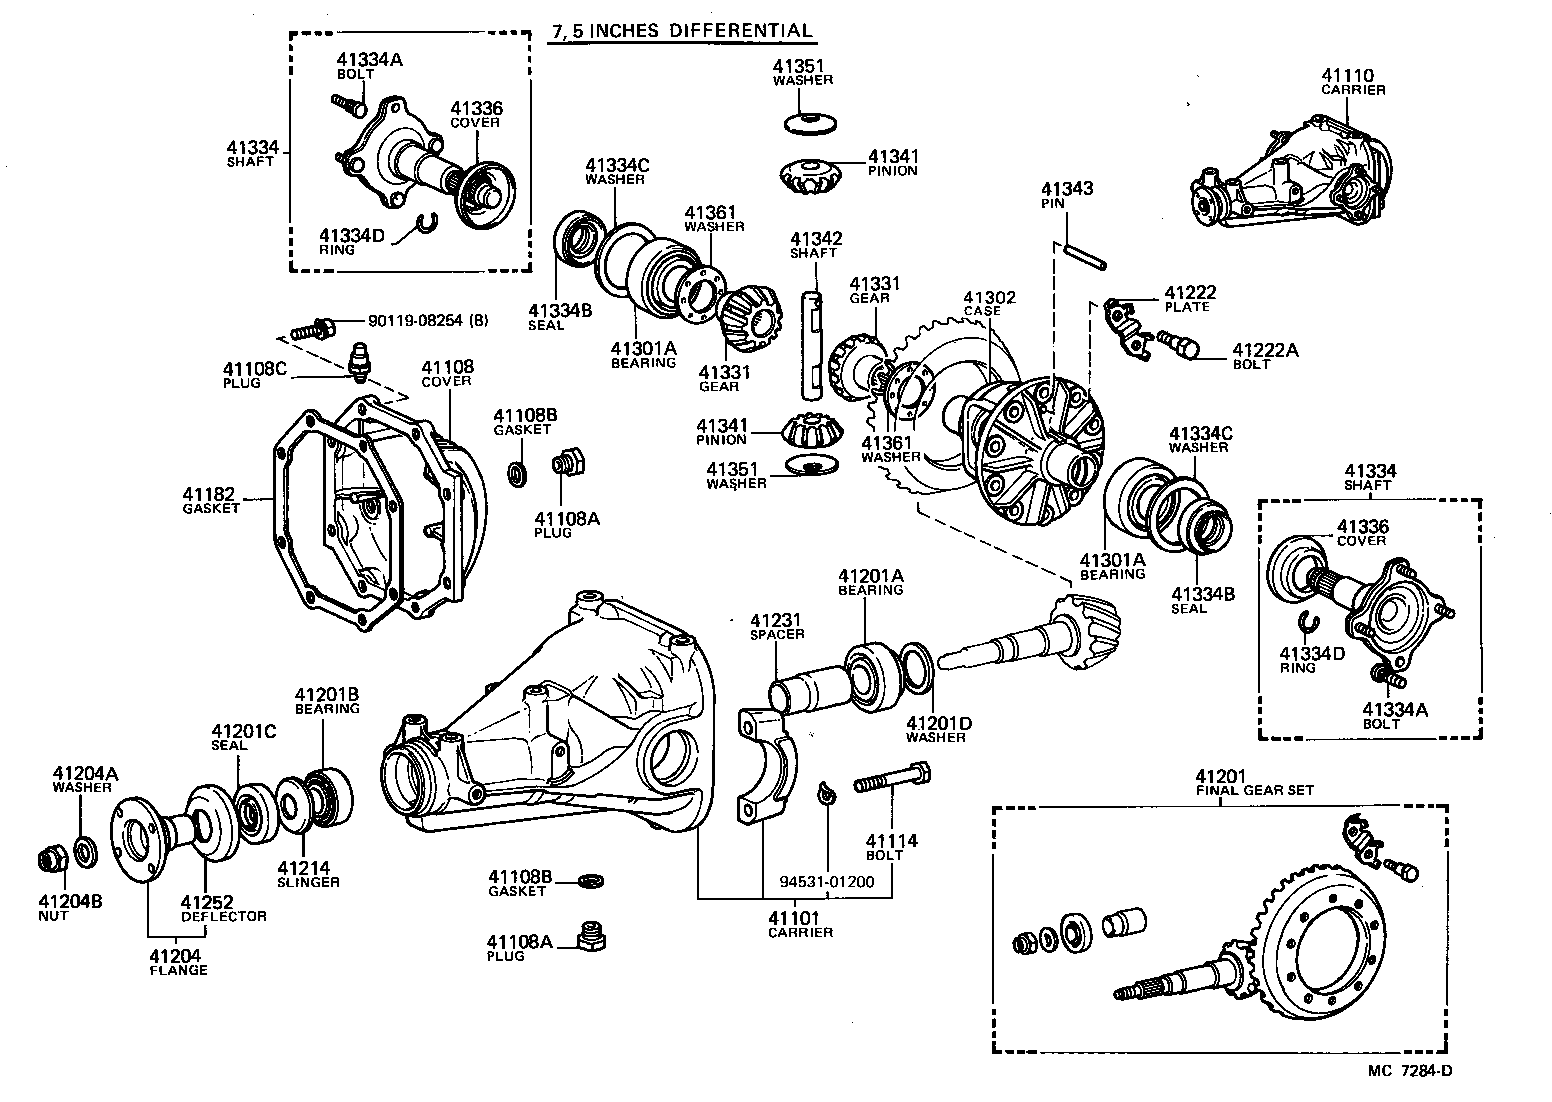  CELICA |  REAR AXLE HOUSING DIFFERENTIAL